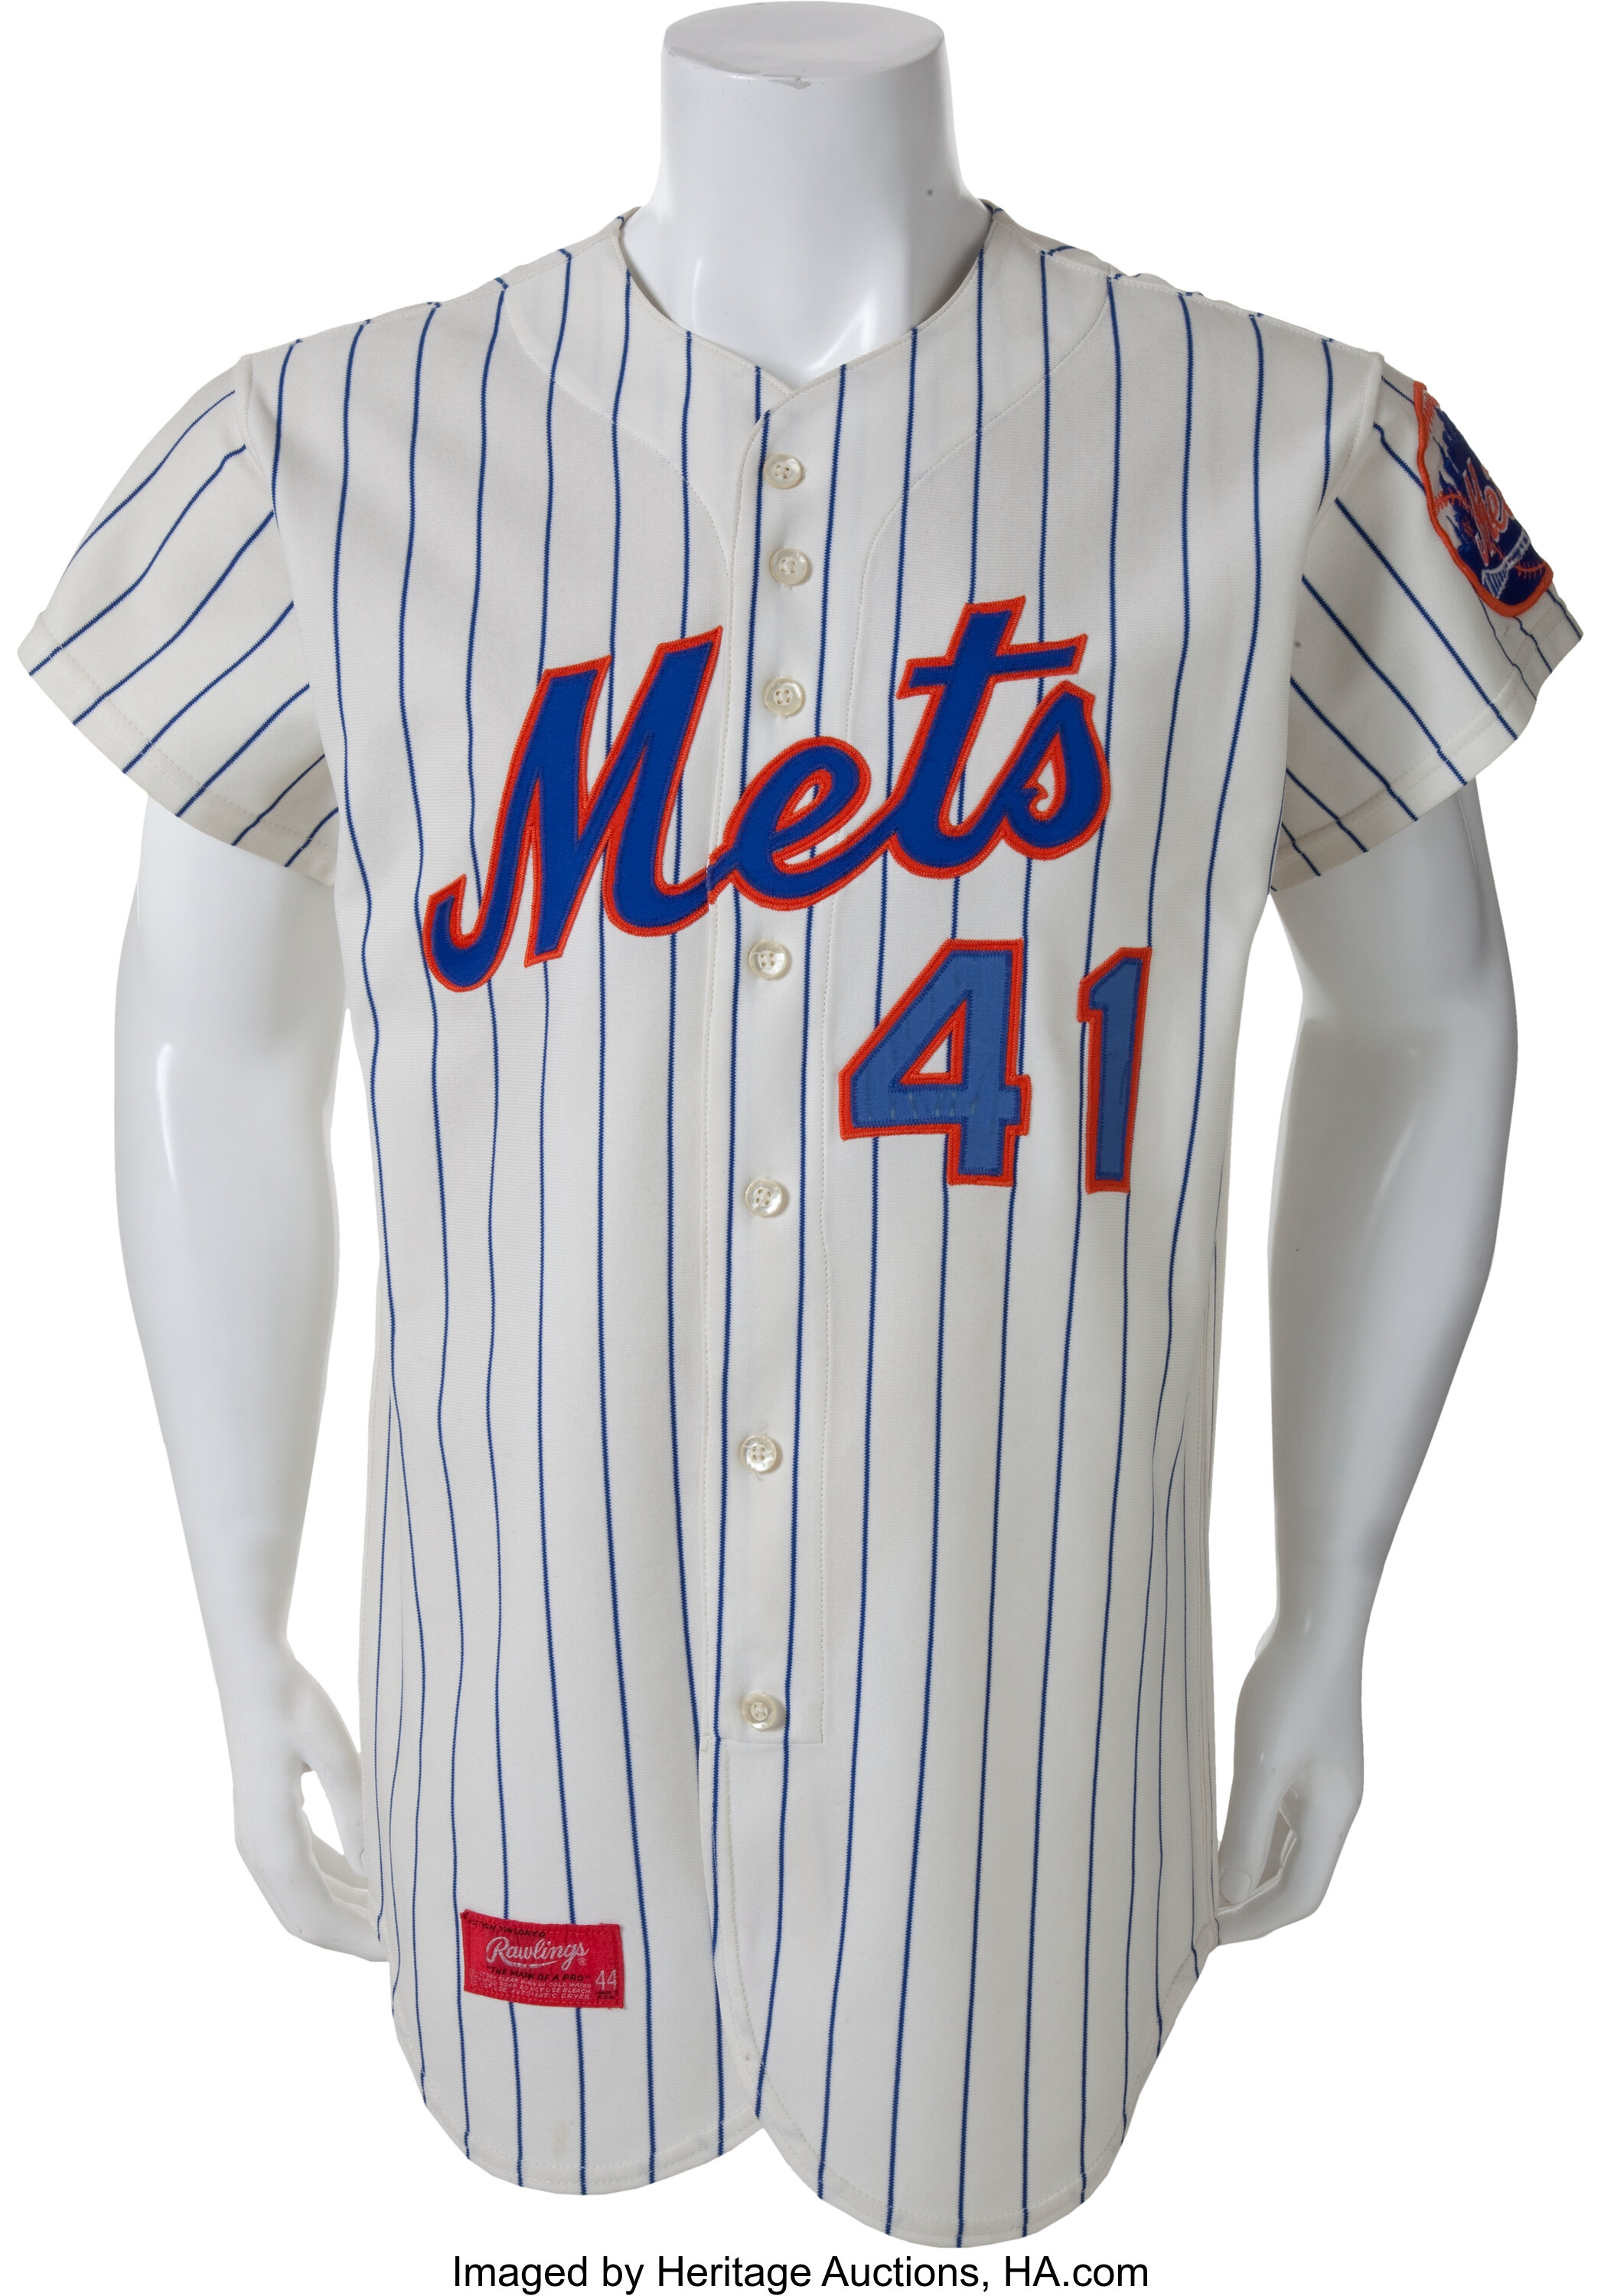 old mets jersey